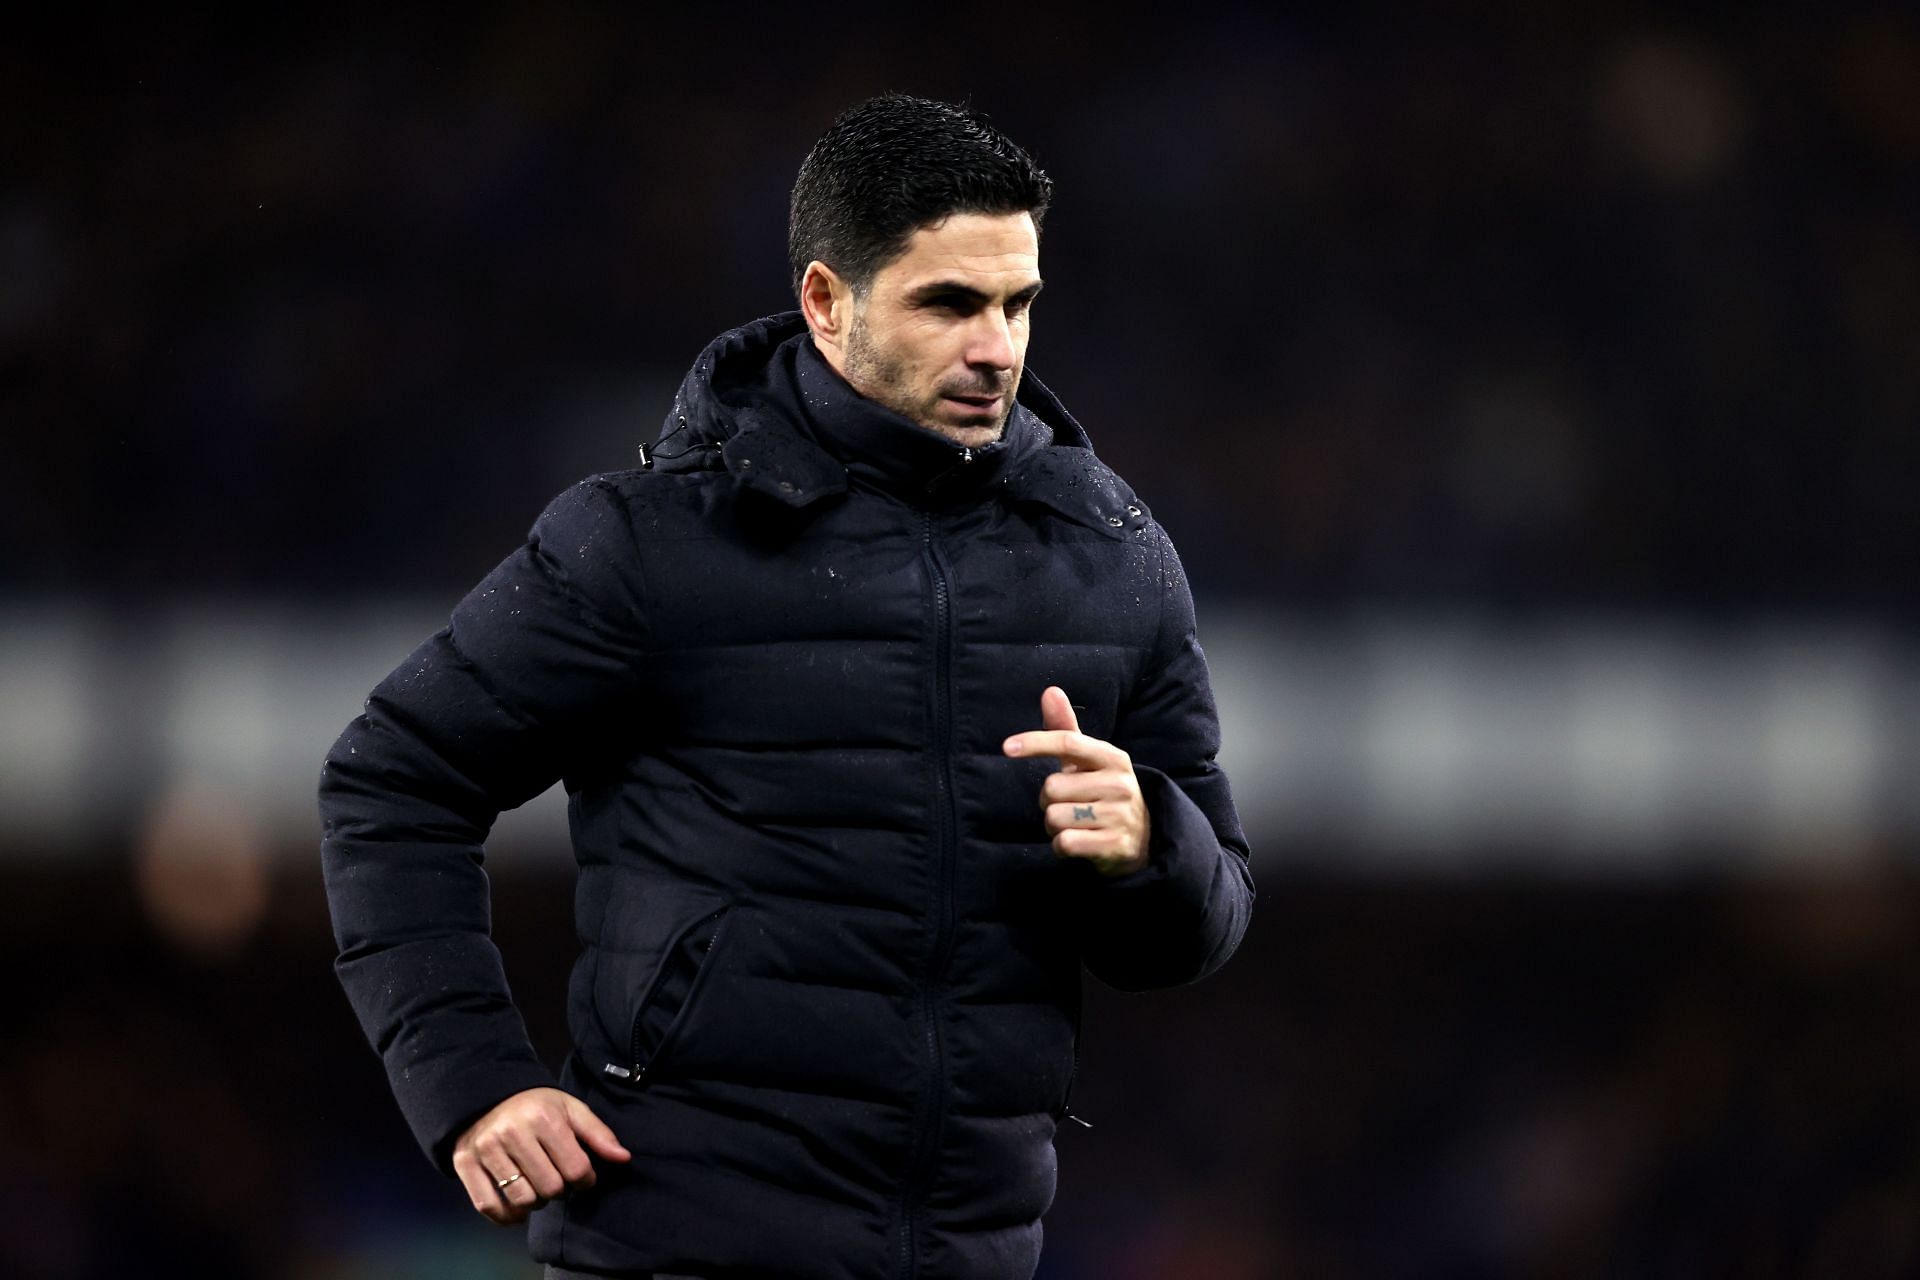 Arsenal manager Mikel Arteta is desperate for a win against Southampton.